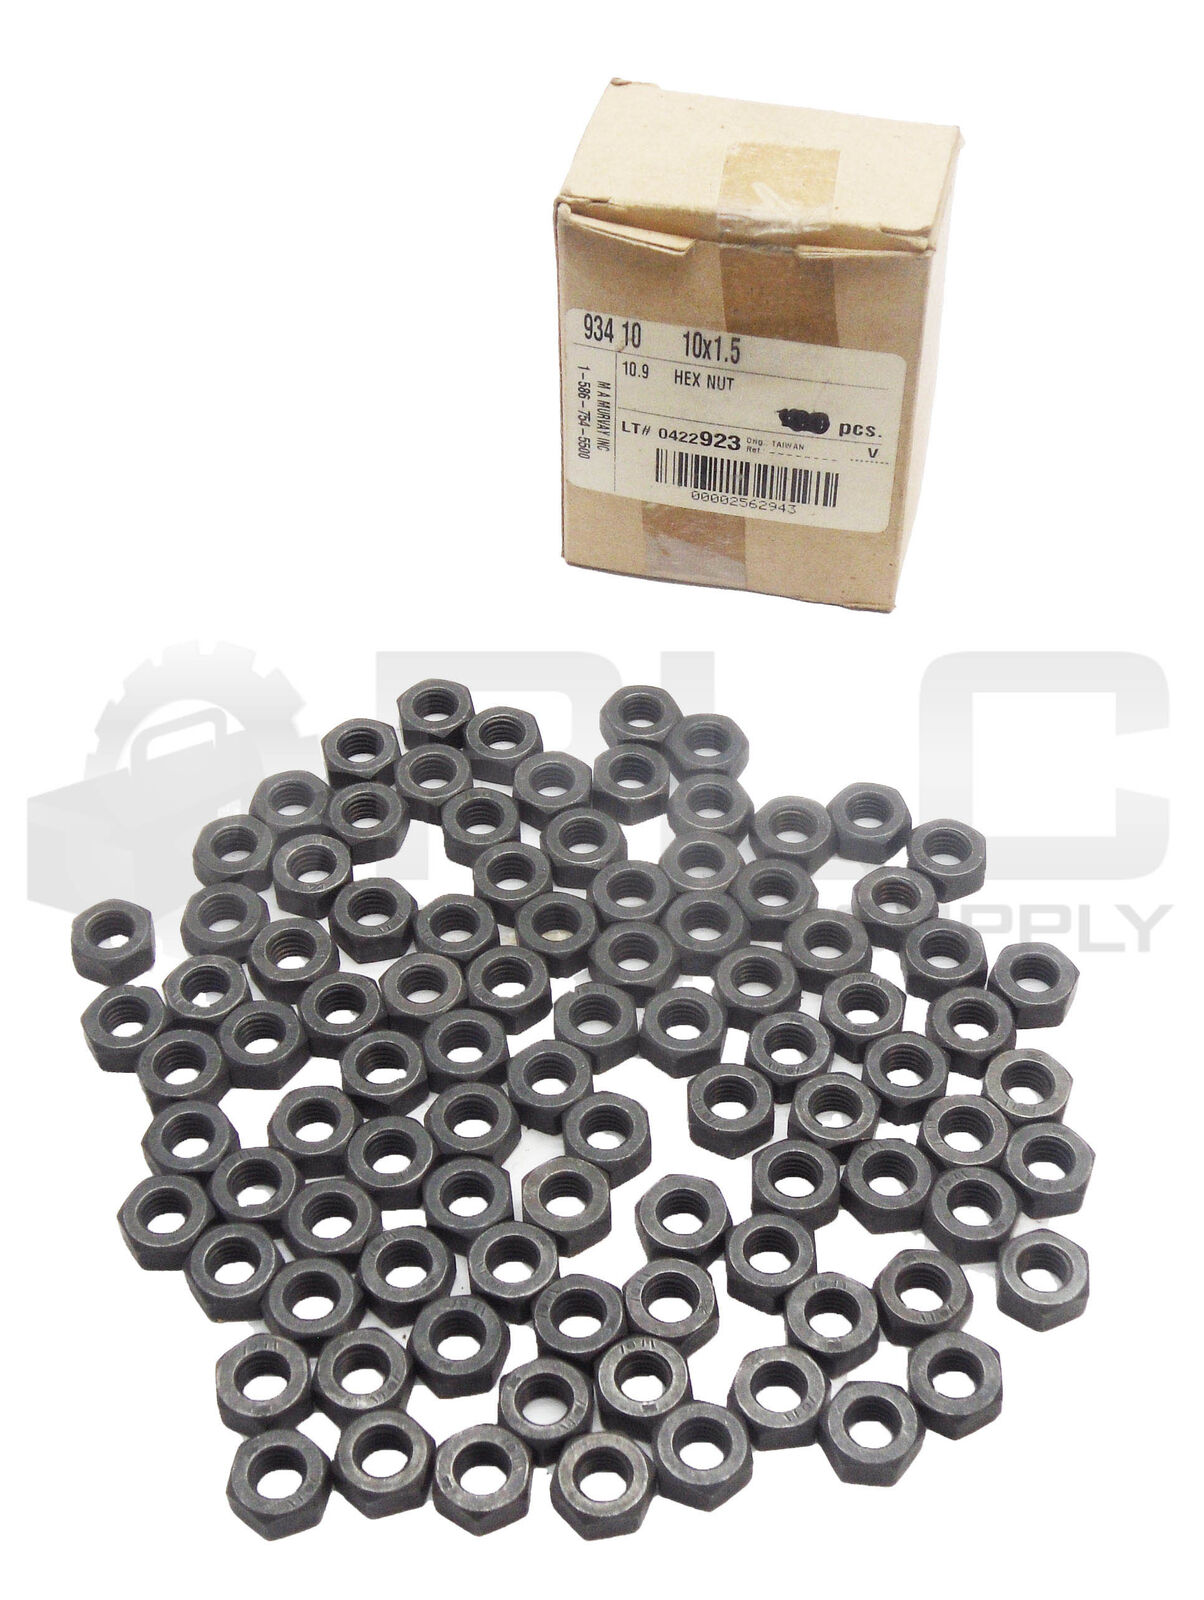 NEW BOX OF 93 934 10 HEX NUTS 10X1.5 10.9